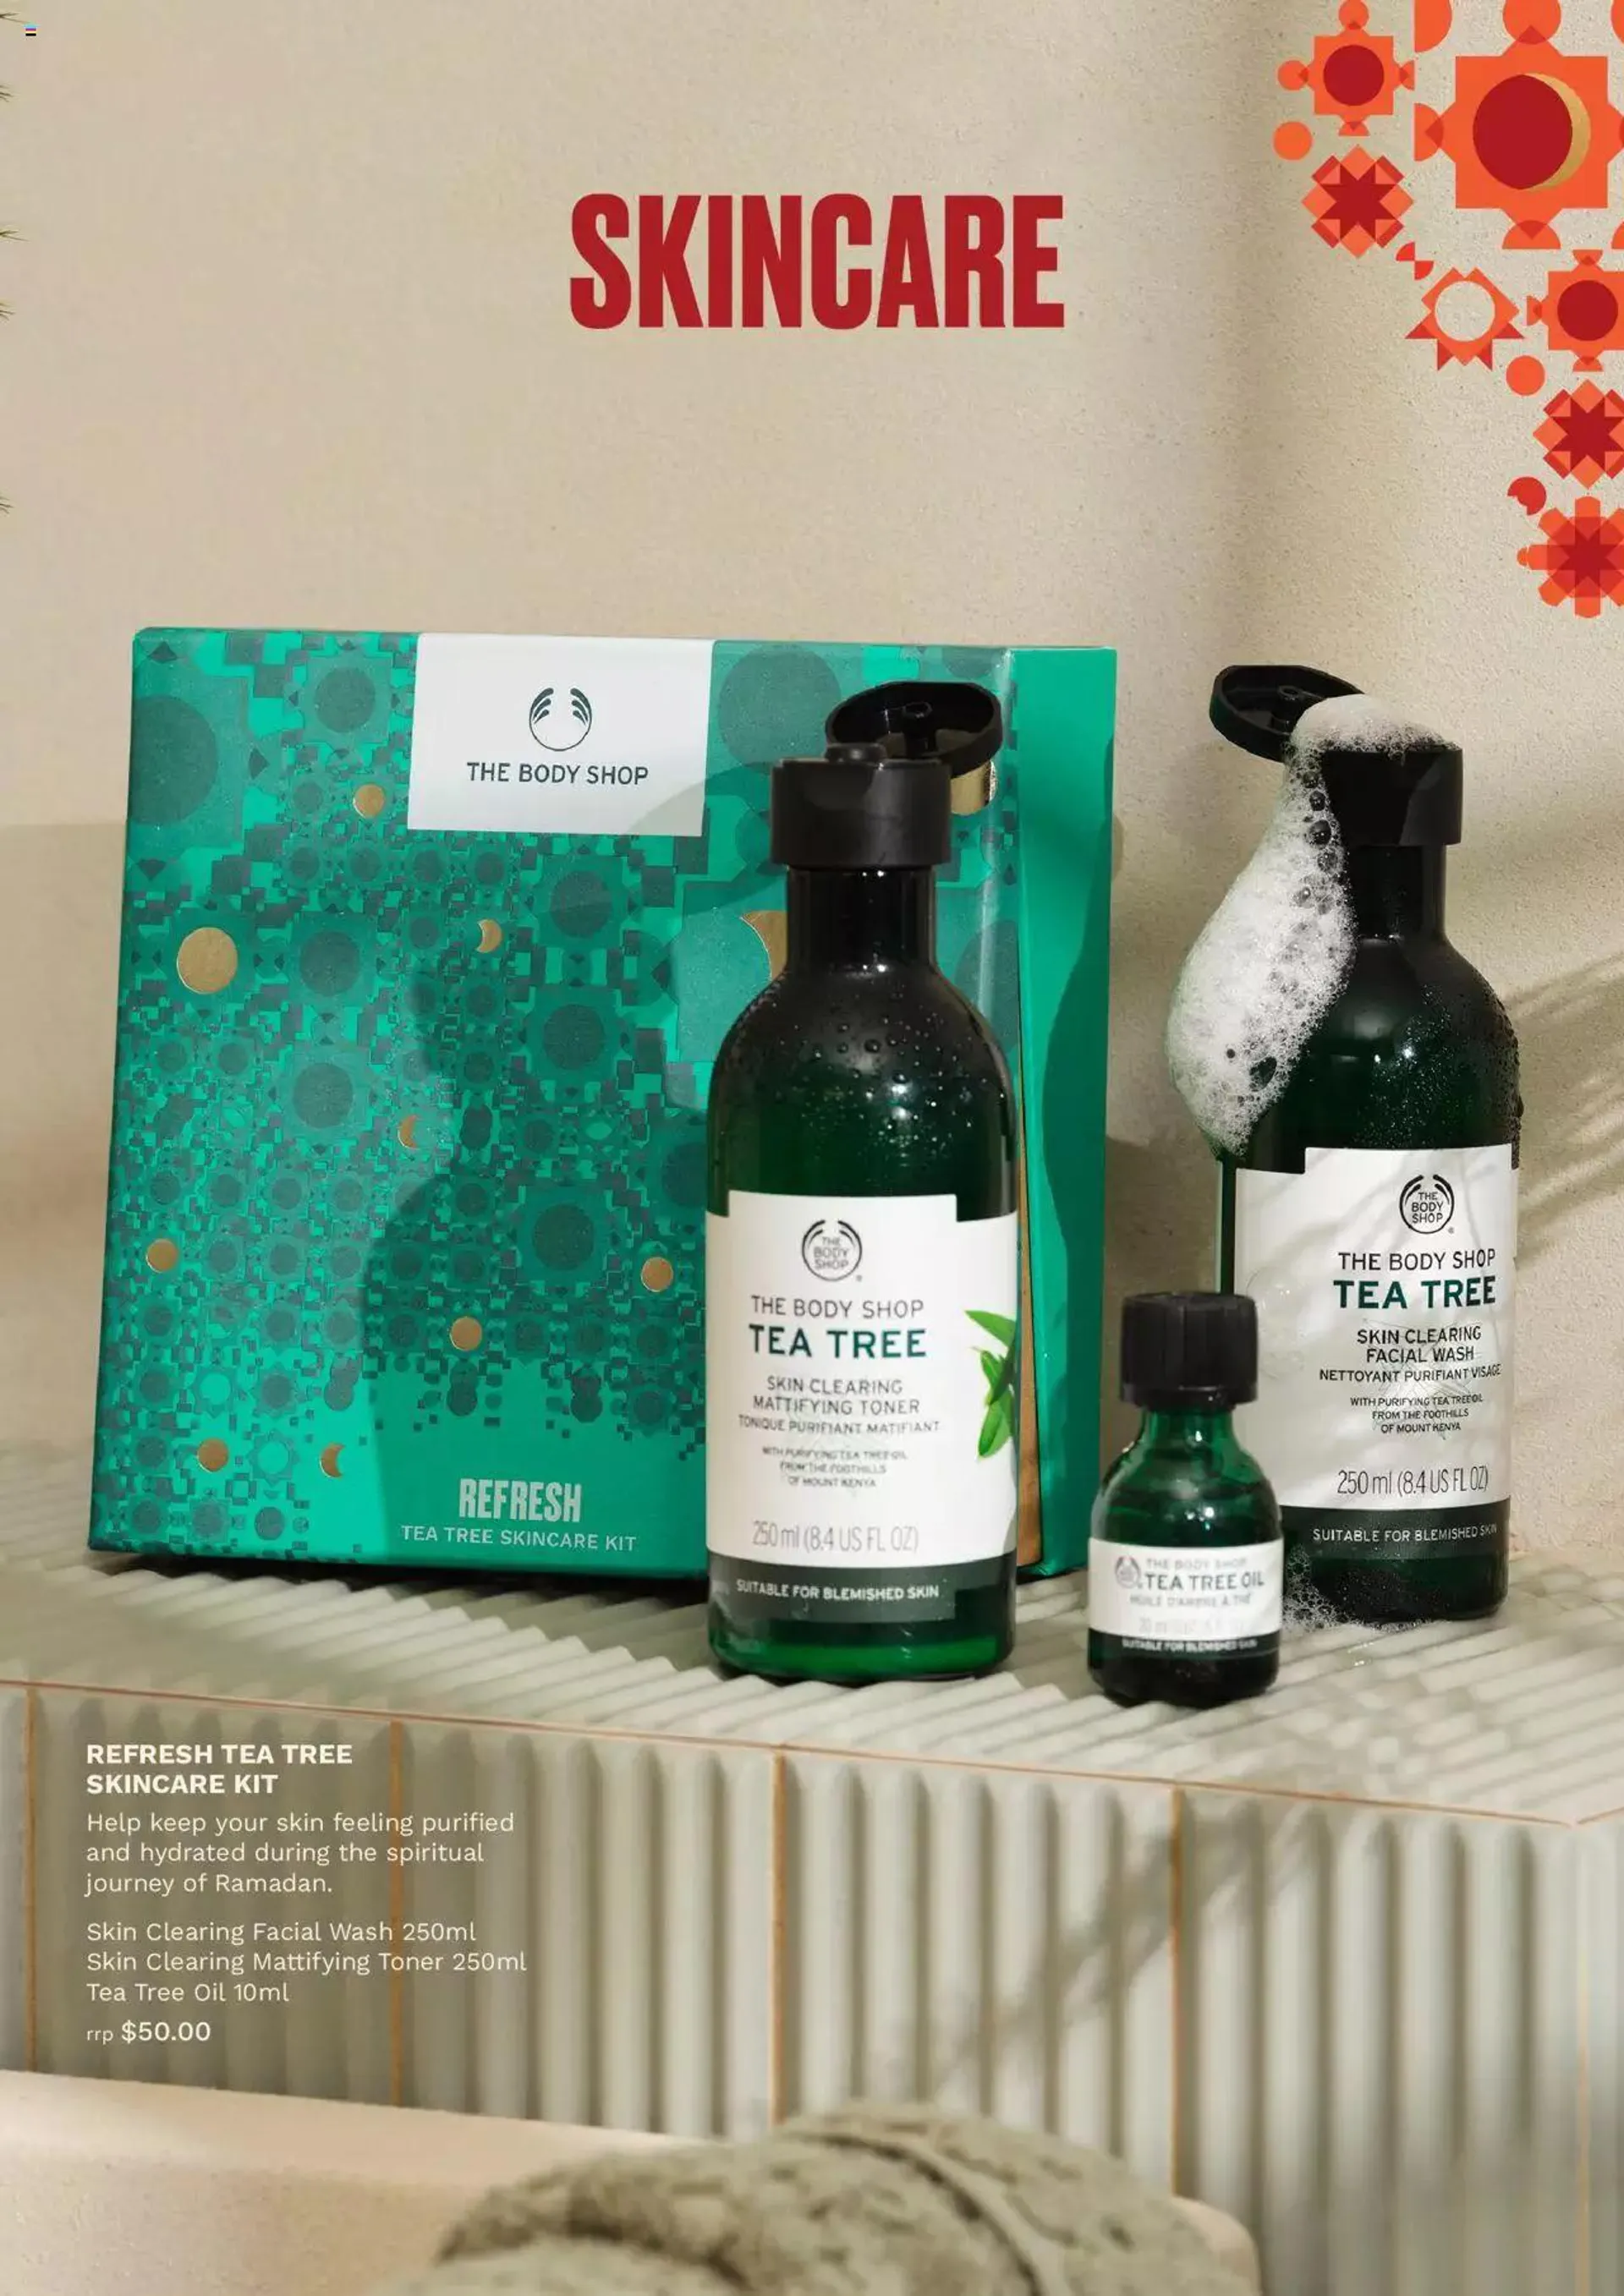 The Body Shop Lift Their Spirits Gift Guide - 6